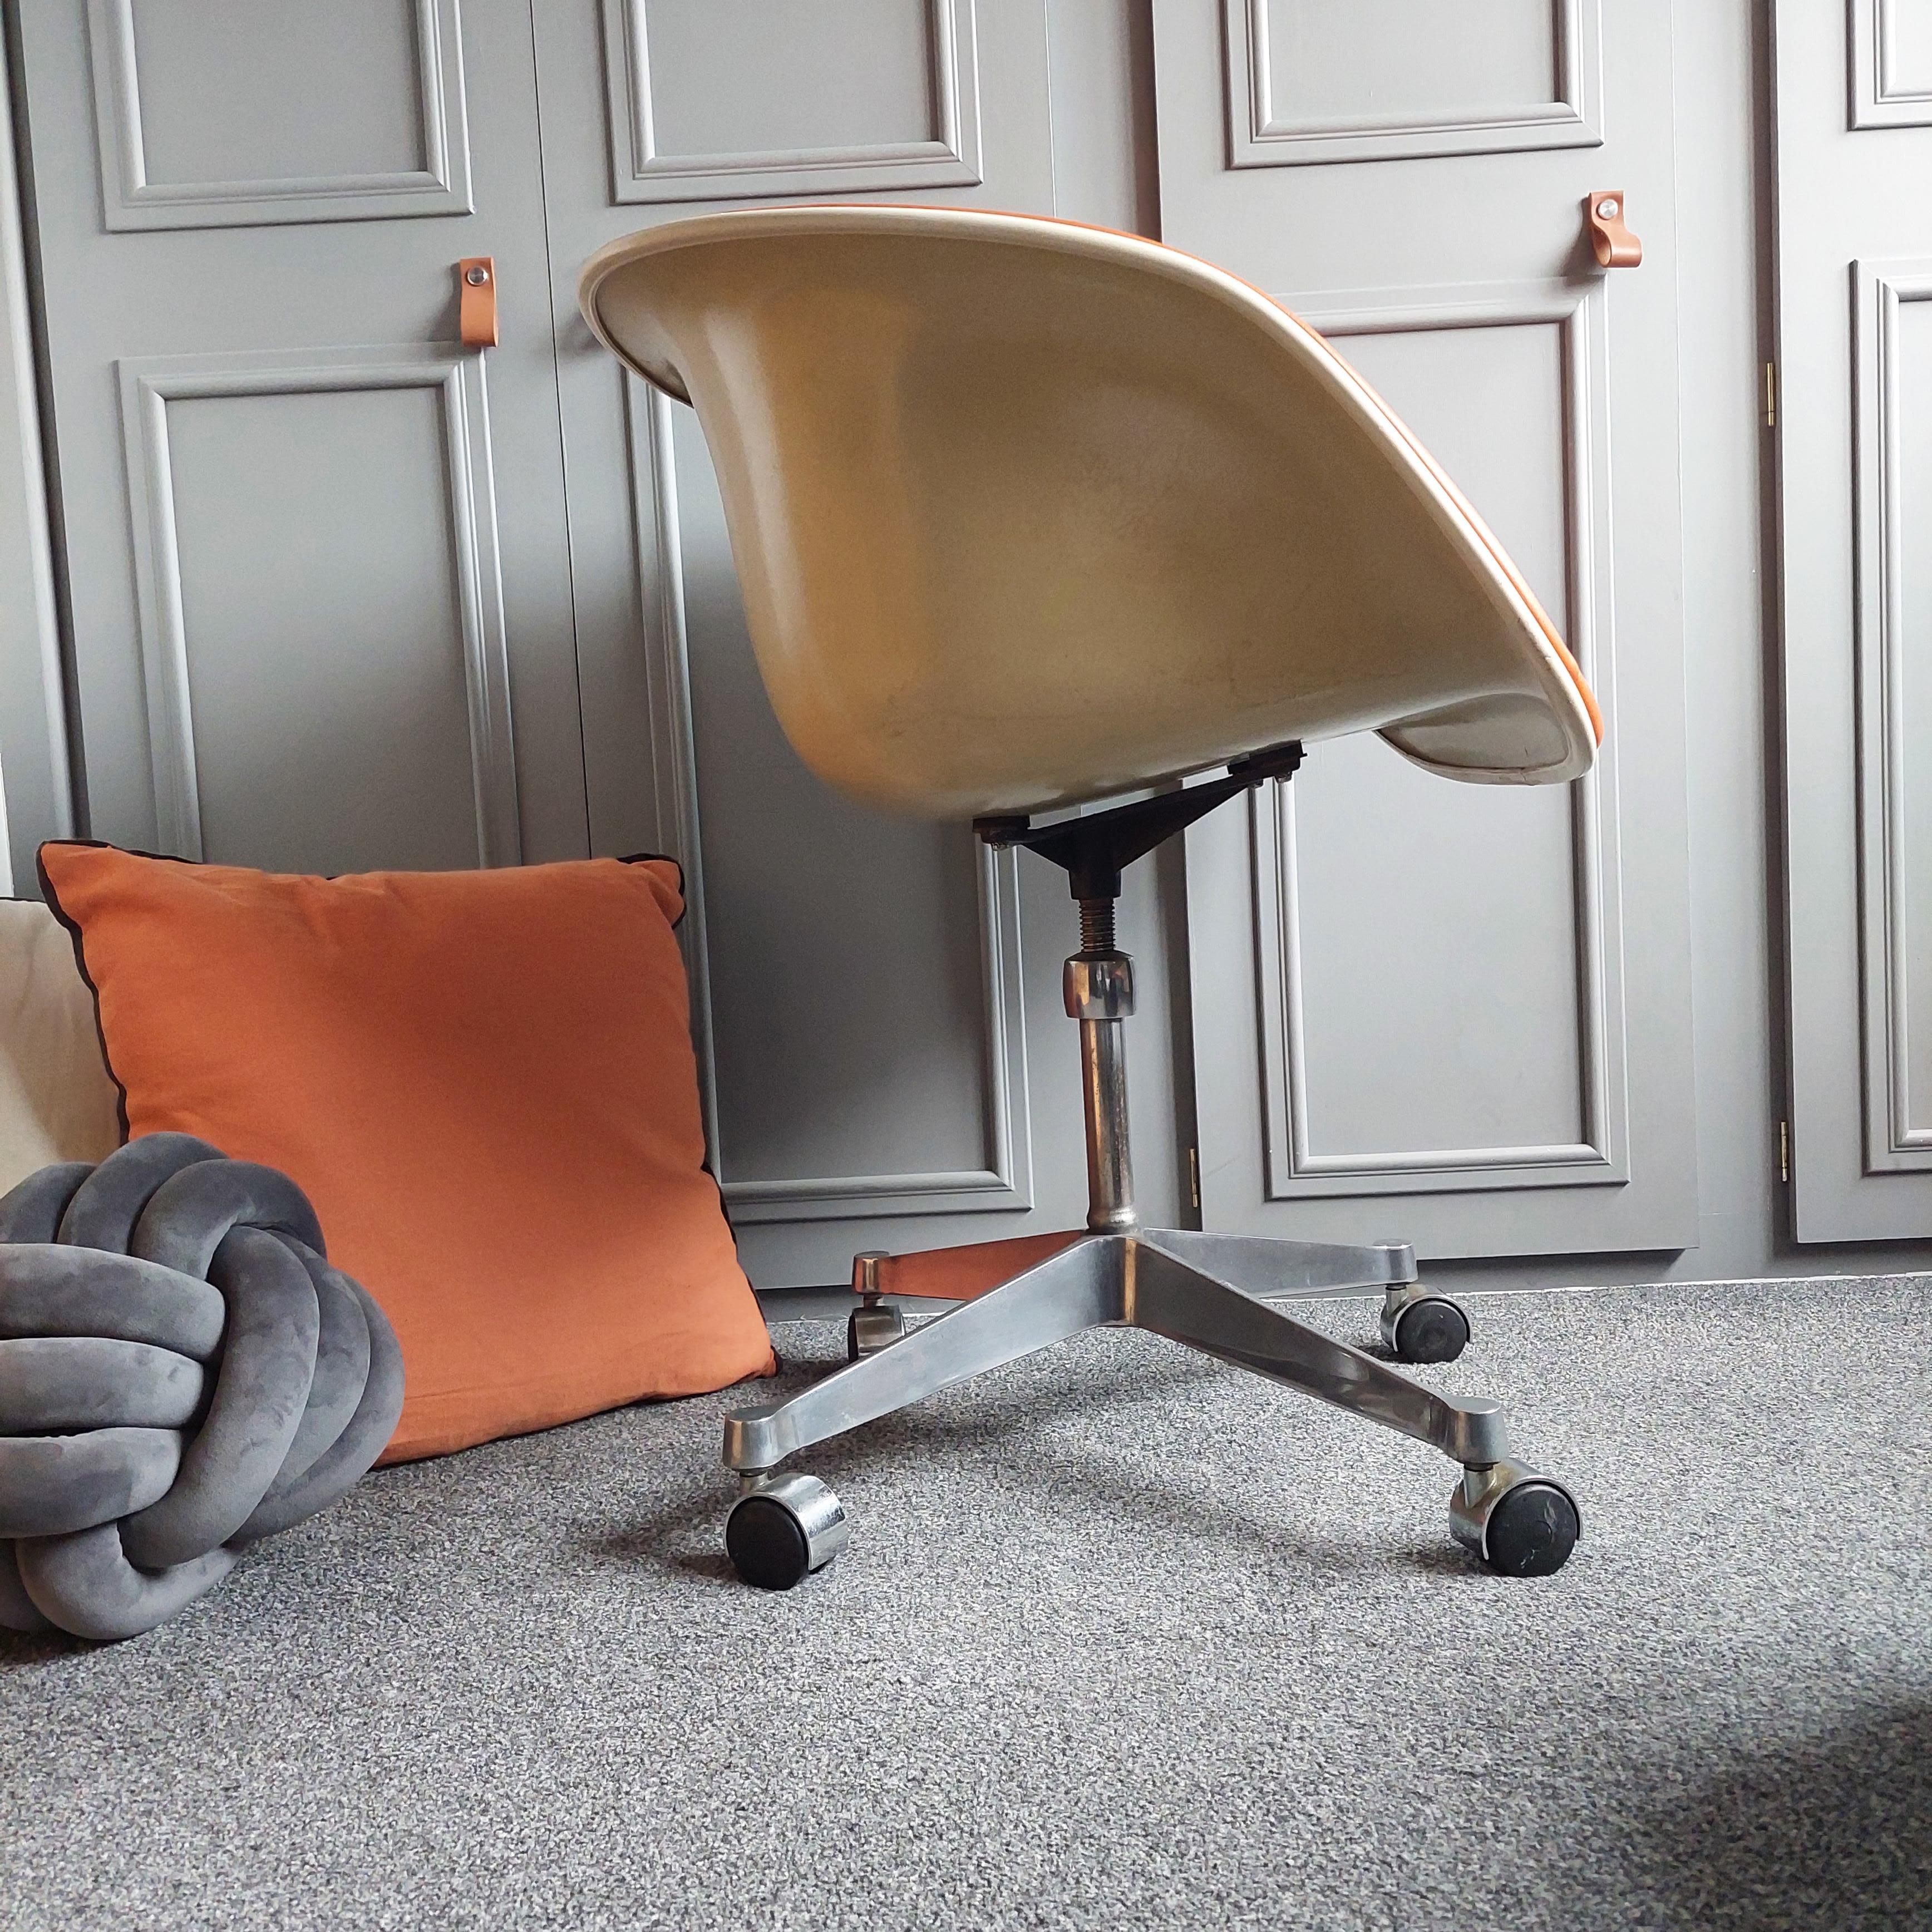 20th Century Mid Century Swivel Chair by Charles & Ray Eames Herman Miller, Fiberglass 1960s